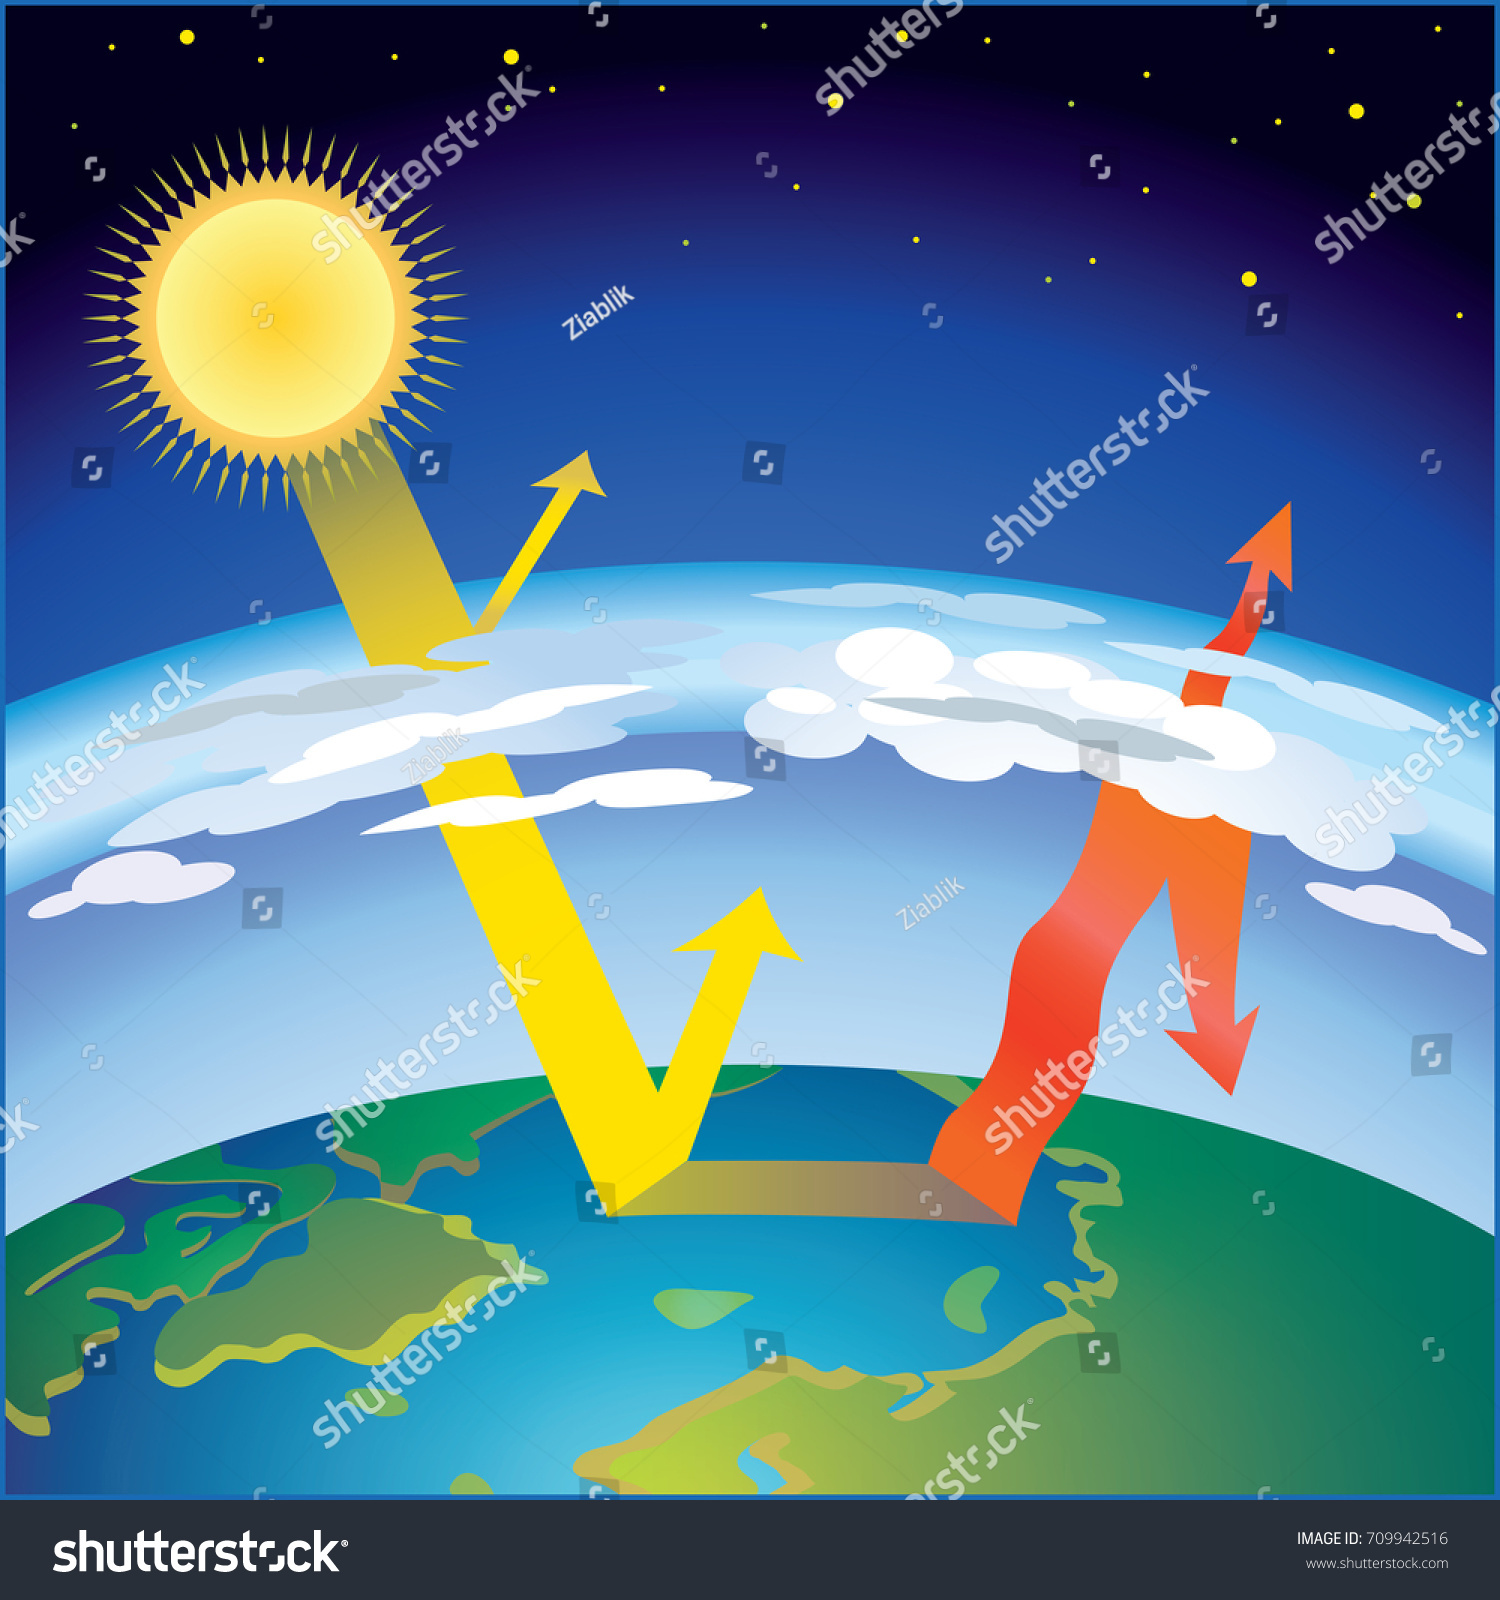 7,072 Greenhouse gas effect Images, Stock Photos & Vectors | Shutterstock